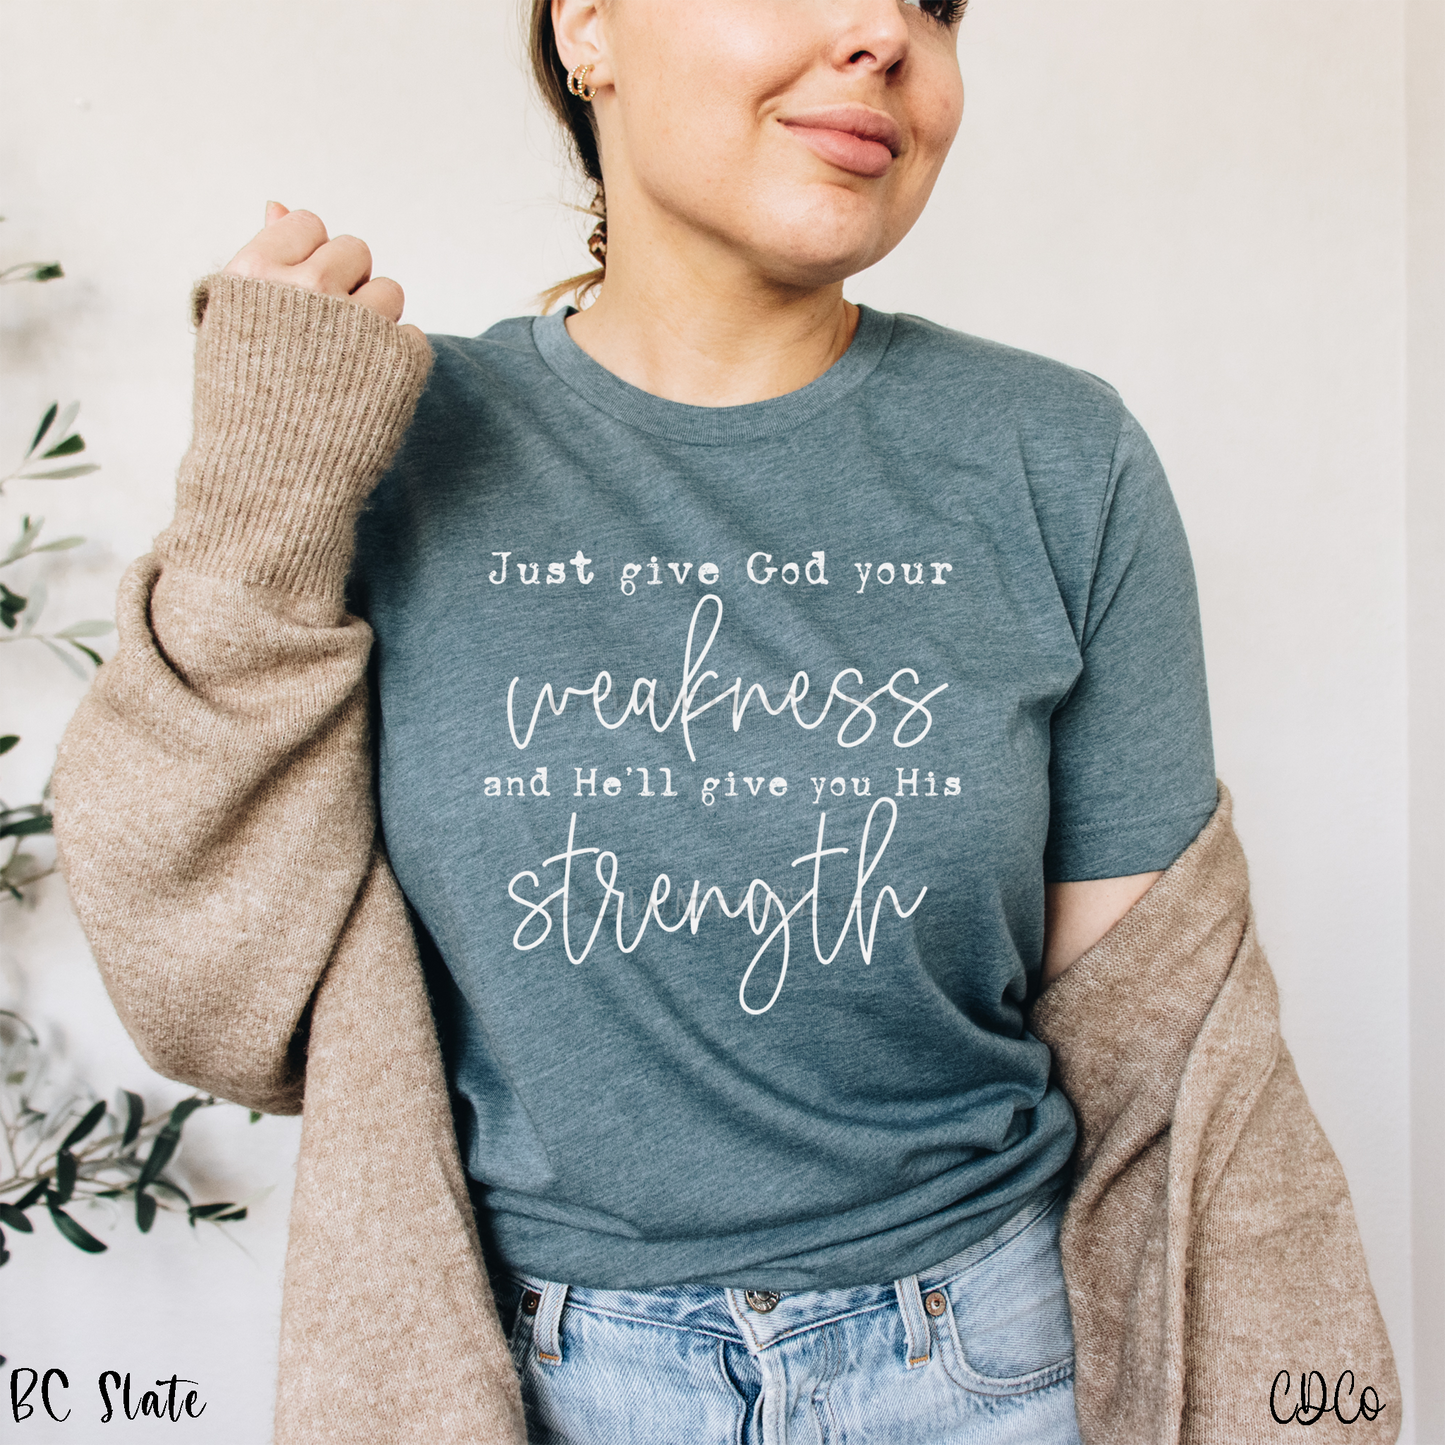 Just Give God Your Weakness and He'll Give You His Strength - semi exclusive (325°)